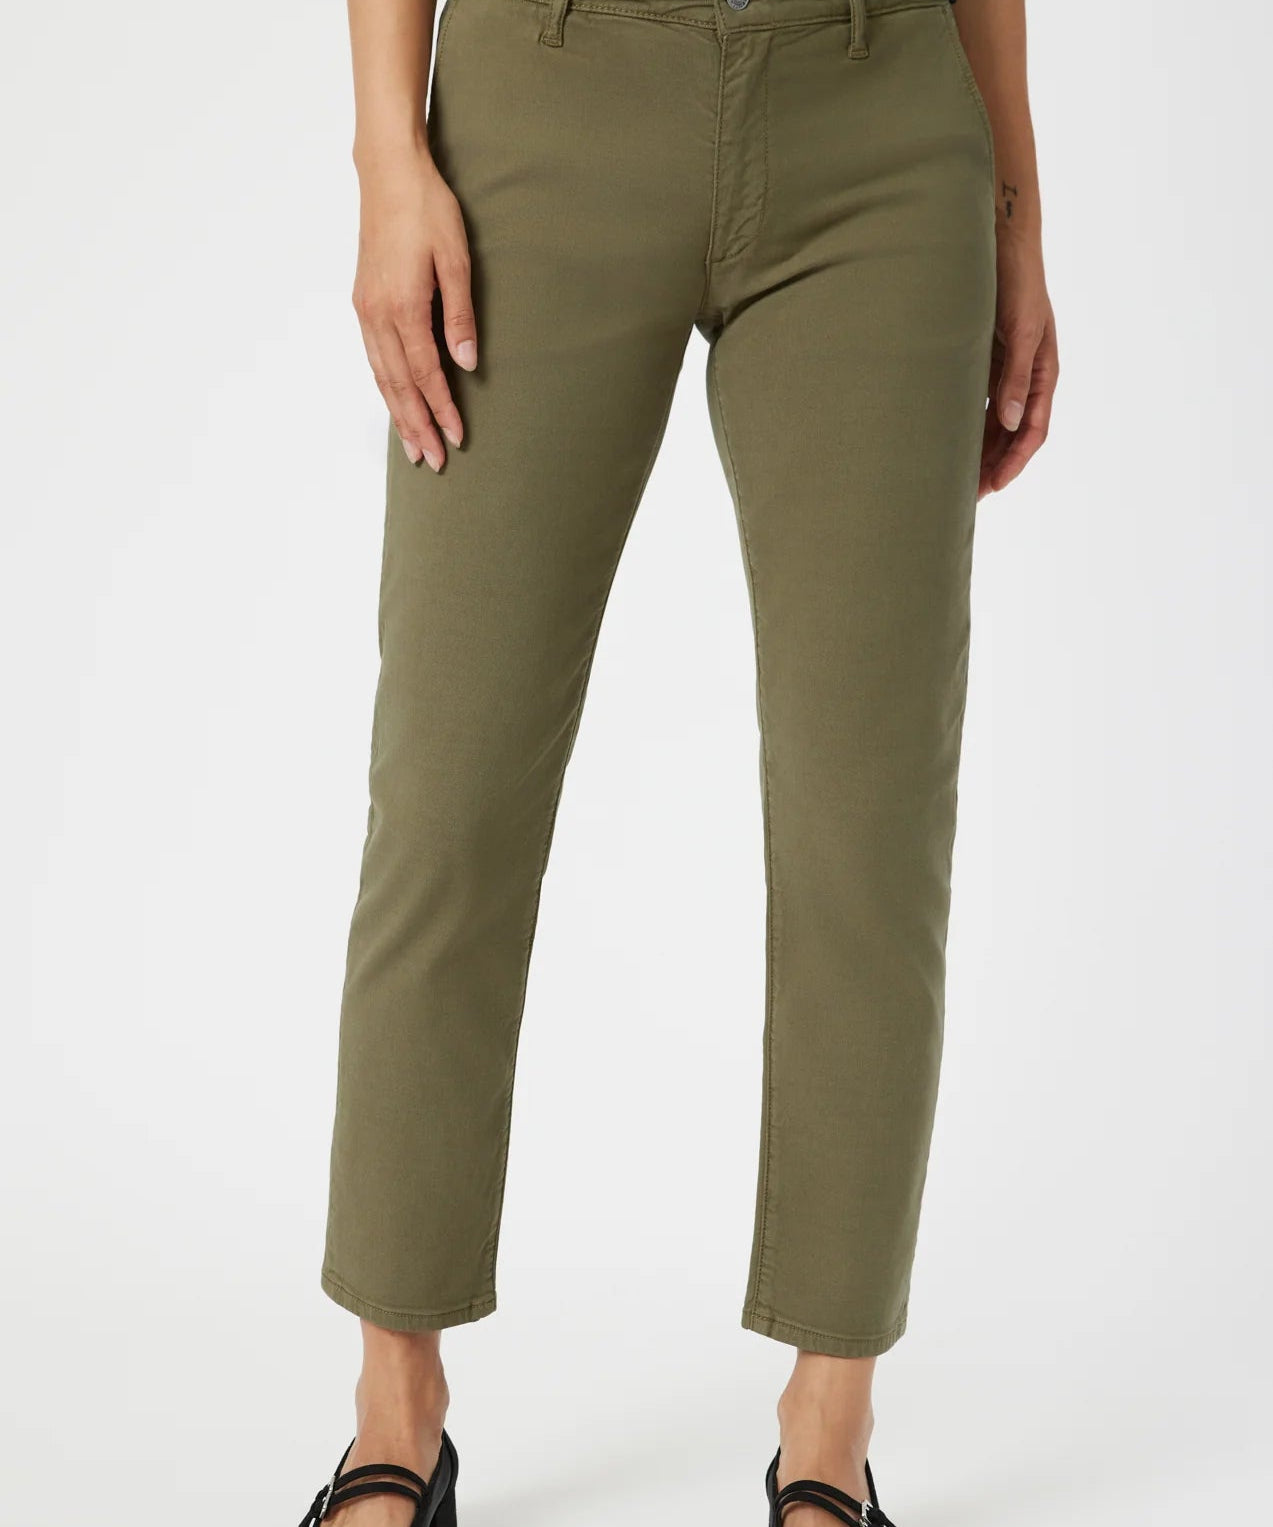 Brooke Slim Chino Pants - Green Luxe Twill - Blue Sky Fashions & Lingerie